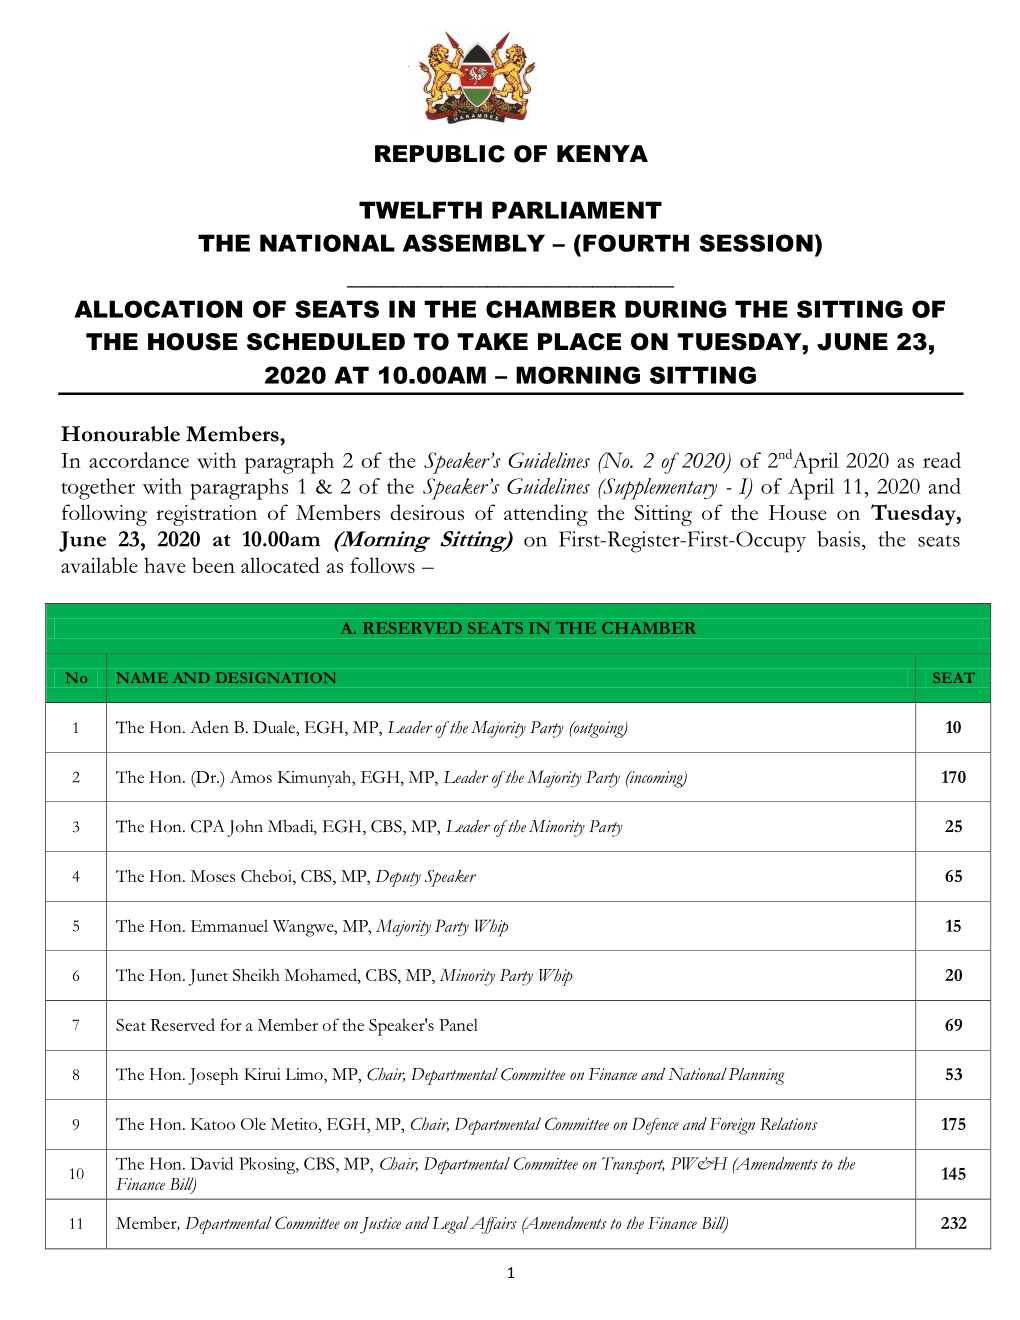 Allocation of Seats in the Chamber During the Sitting of the House Scheduled to Take Place on Tuesday, June 23, 2020 at 10.00Am – Morning Sitting